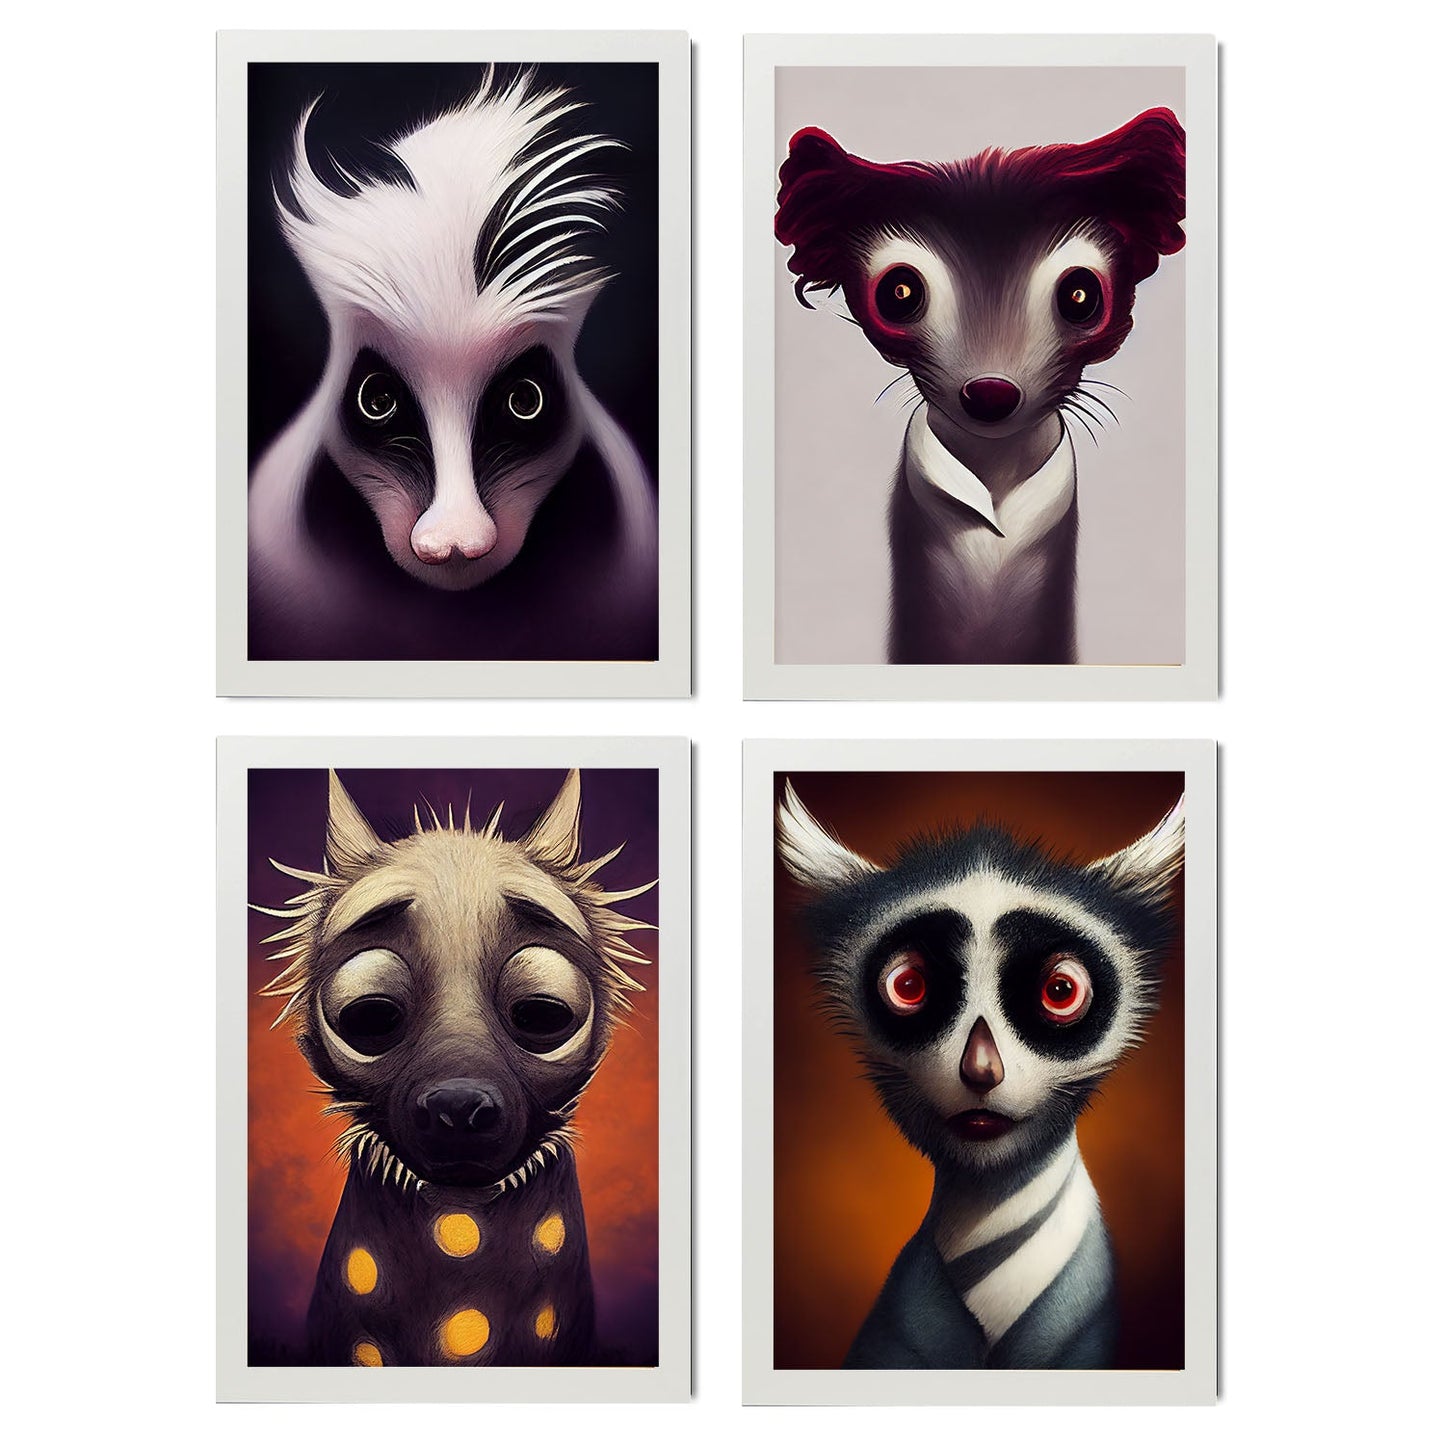 Burton style Animal Illustrations and Posters inspired by Burton's Dark and Goth art Interior Design and Decoration Set Collection 2-Artwork-Nacnic-A4-Marco Blanco-Nacnic Estudio SL